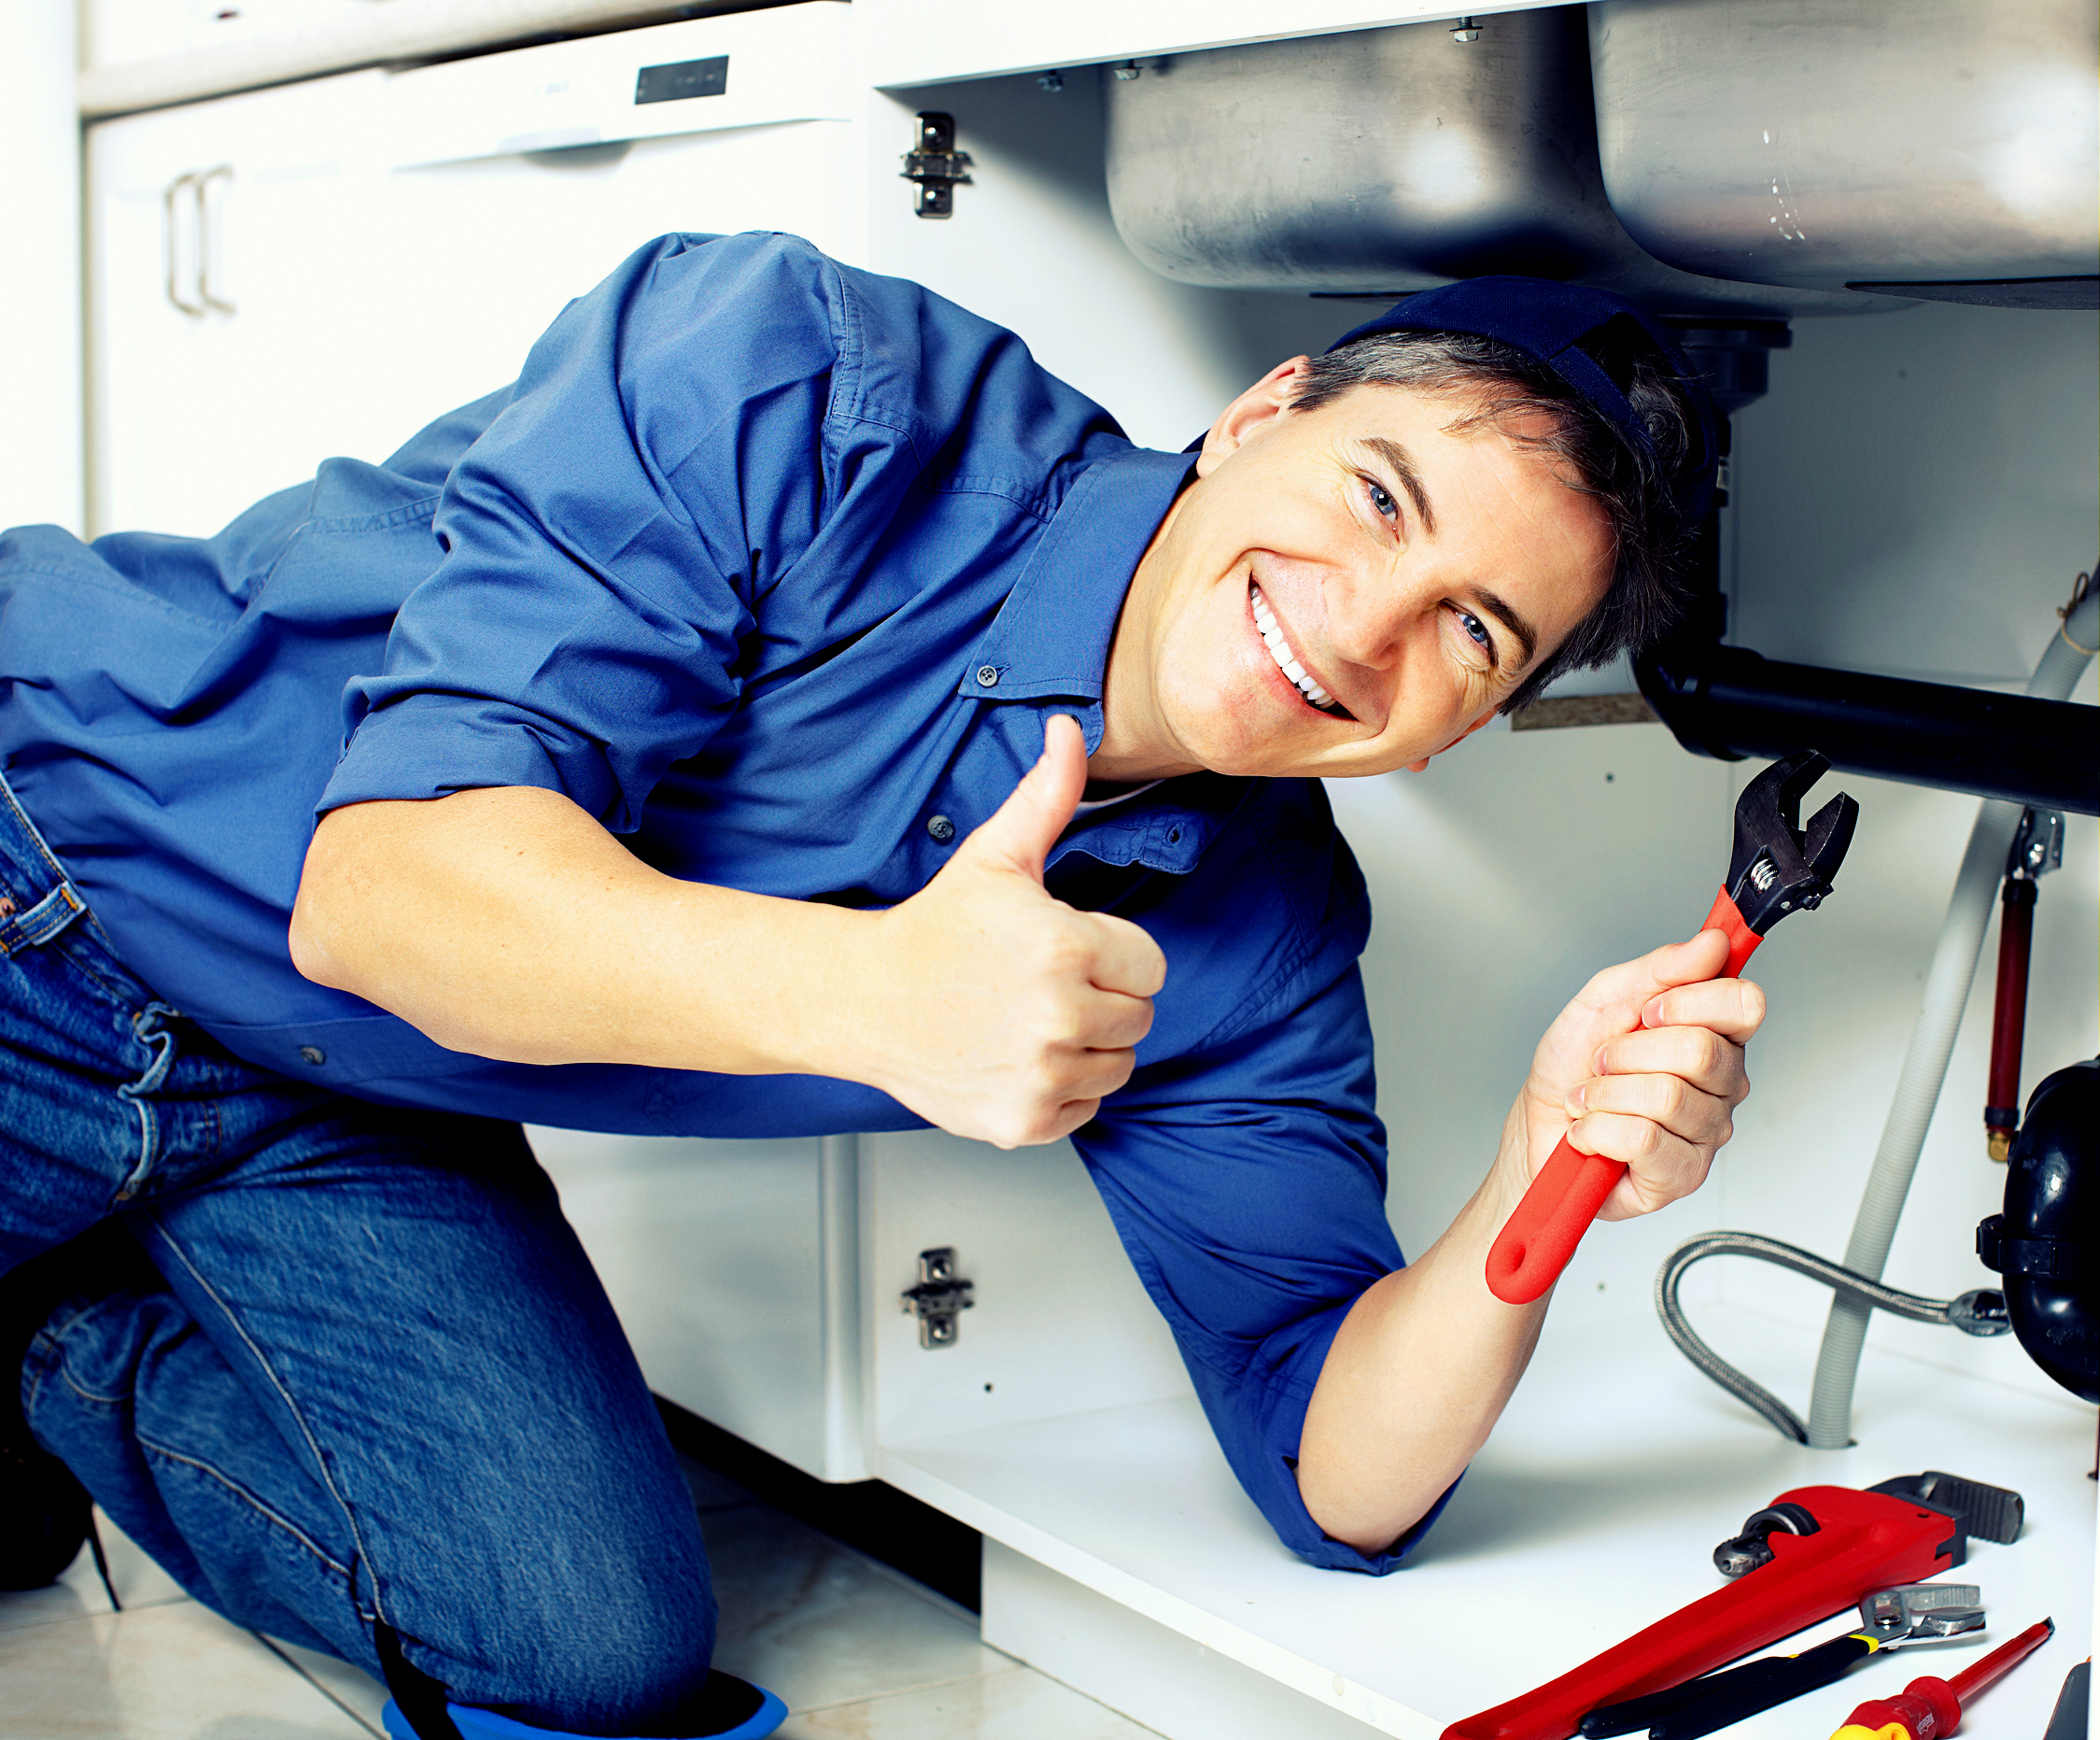 Get a Handyman to fix all your plumbing issues at house or office